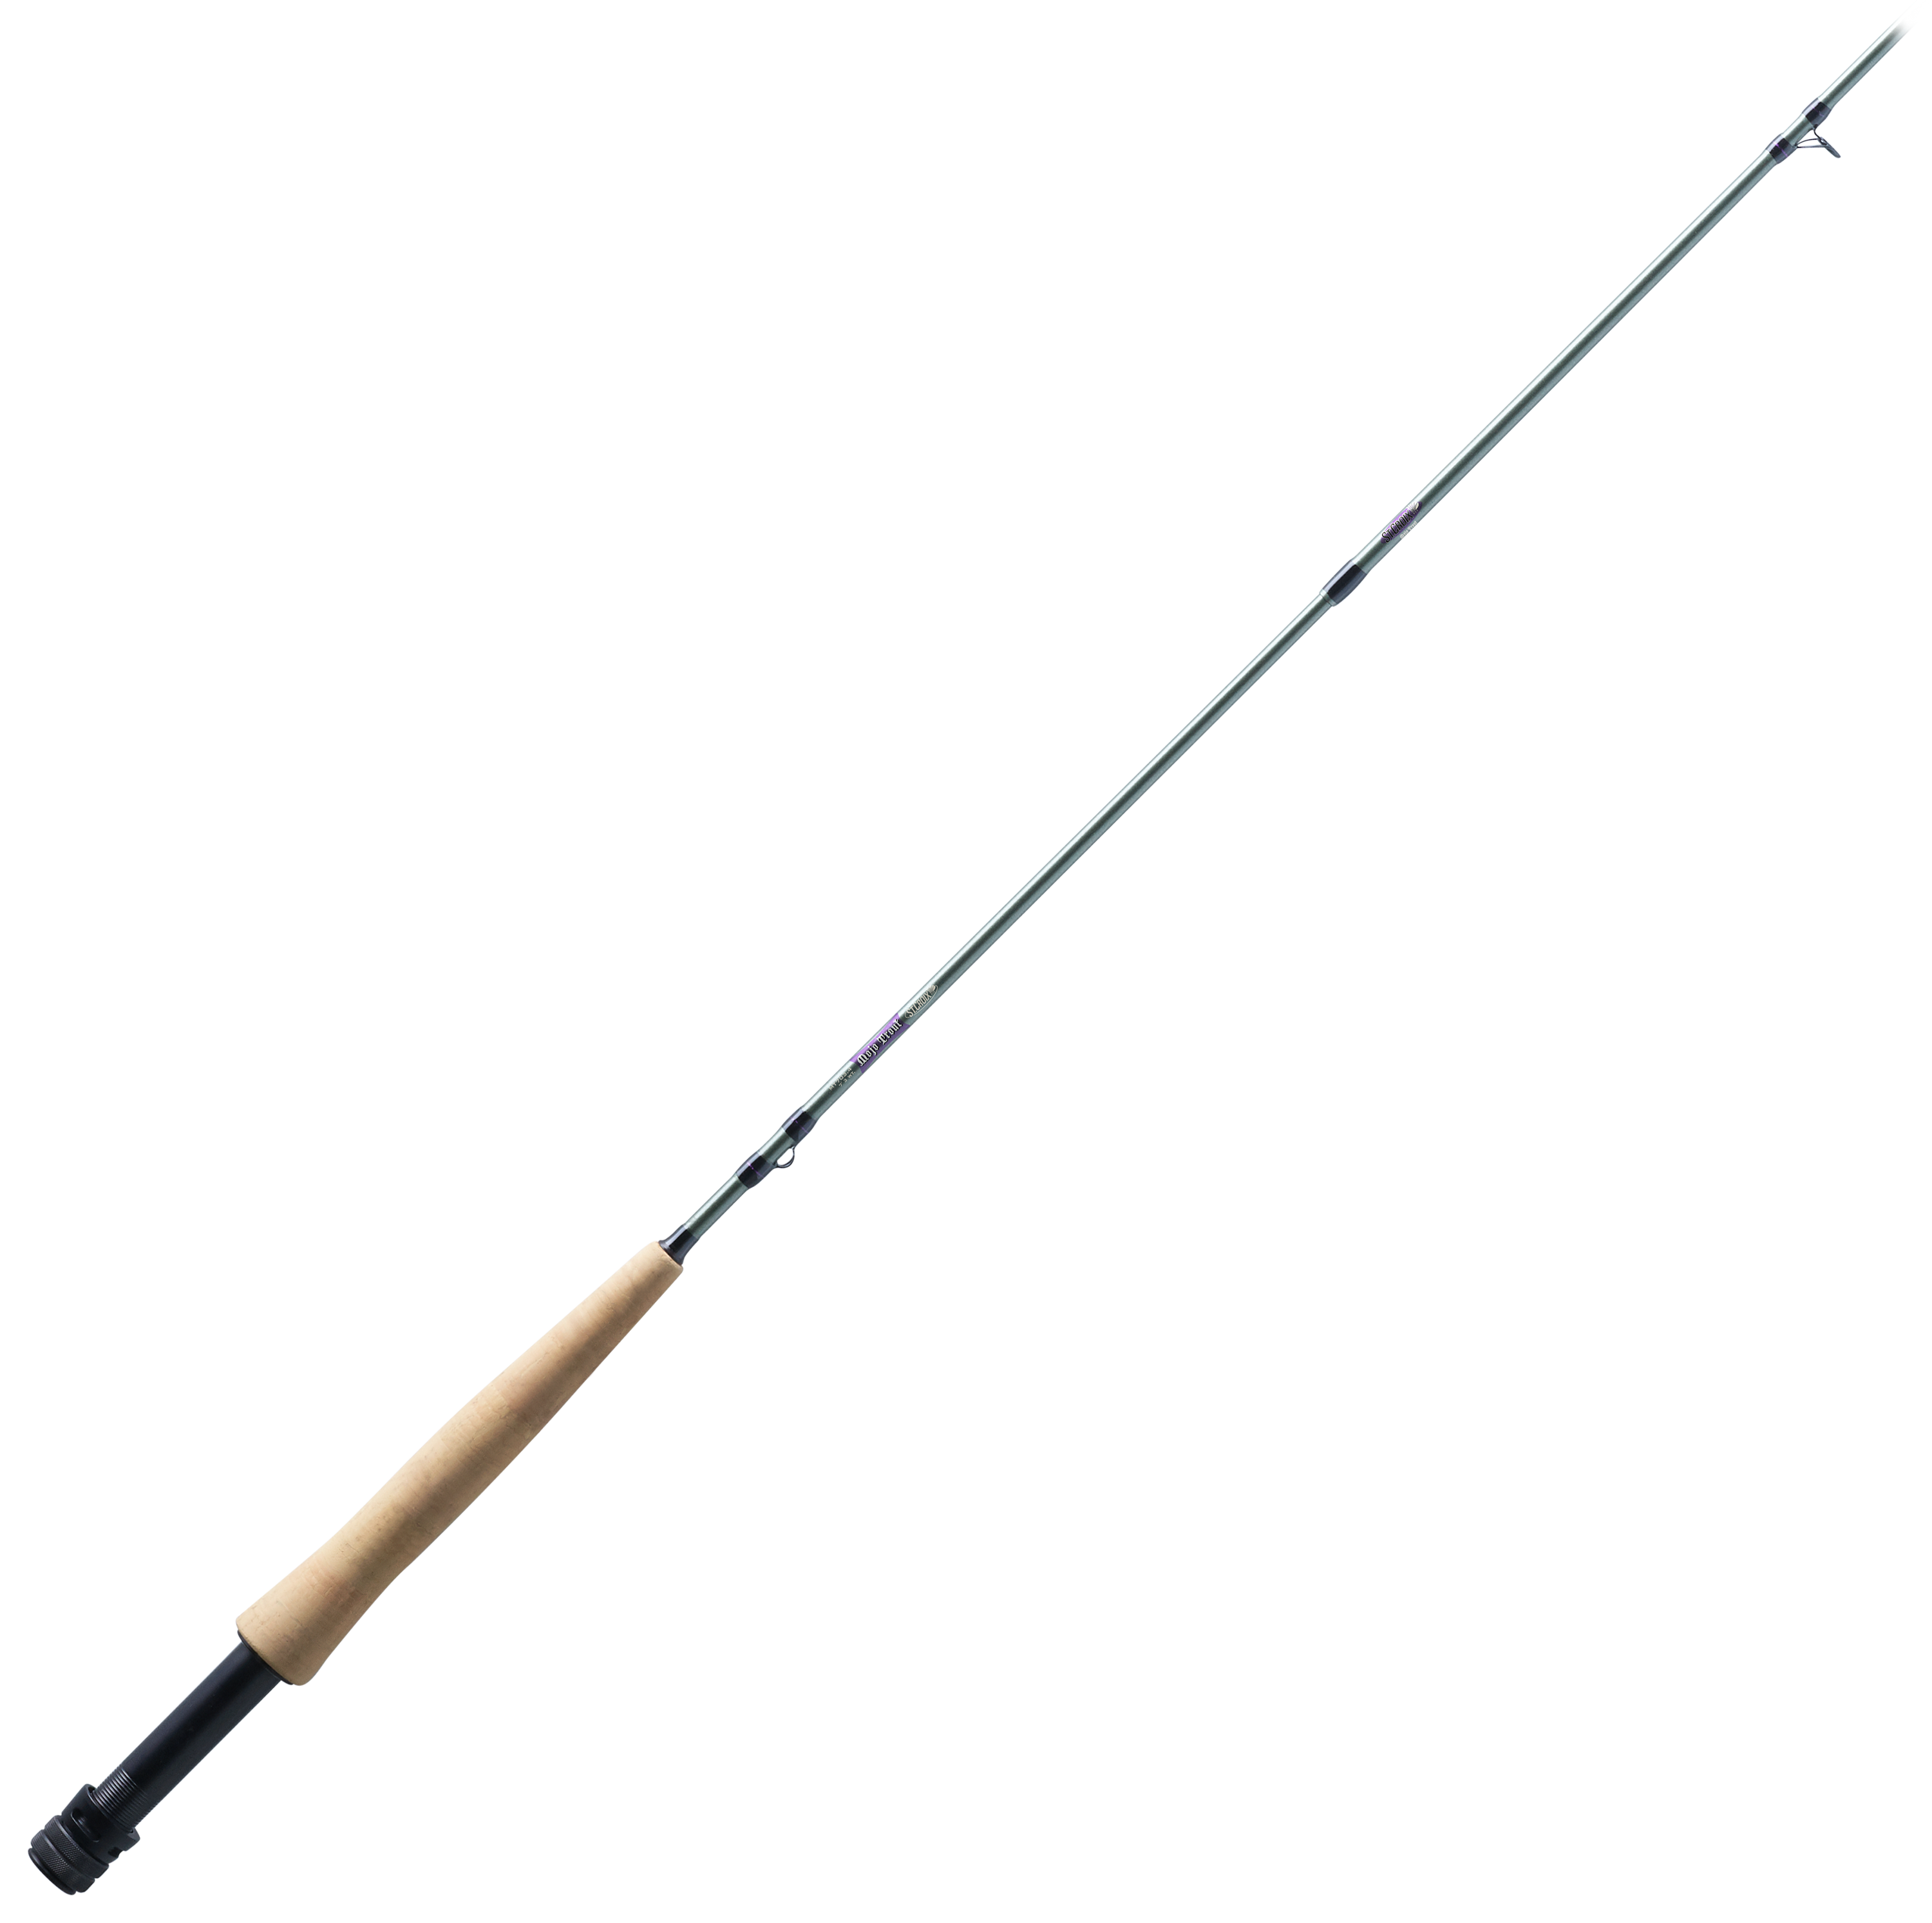 St. Croix Mojo Trout Fly Fishing Rod -  MT905.4